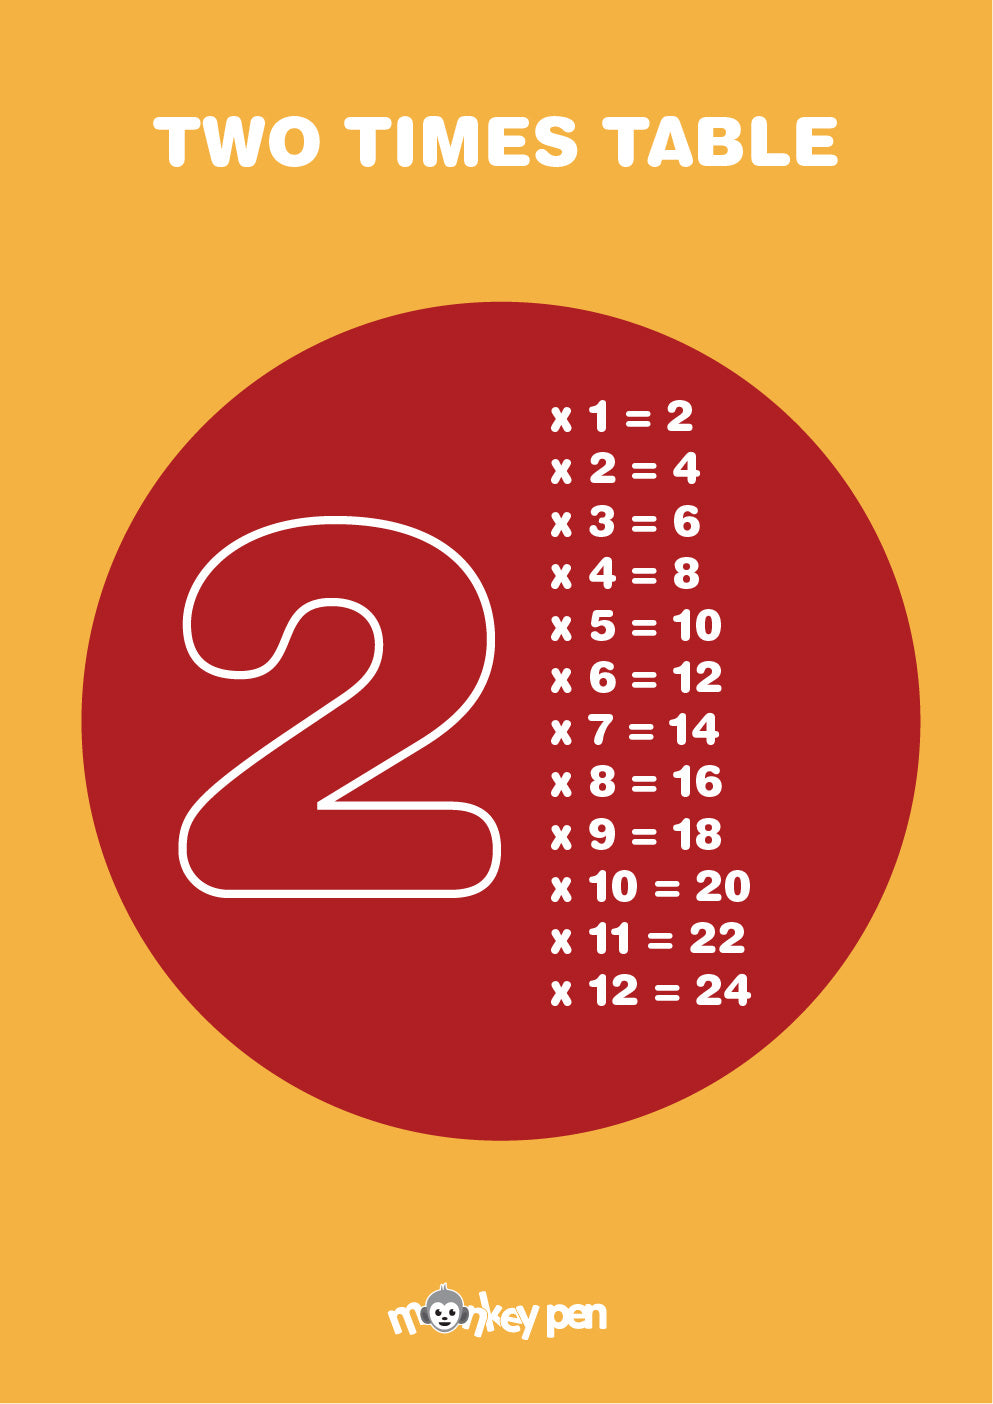 Free Printable 2 Times Table Educational Poster – Monkey Pen Store